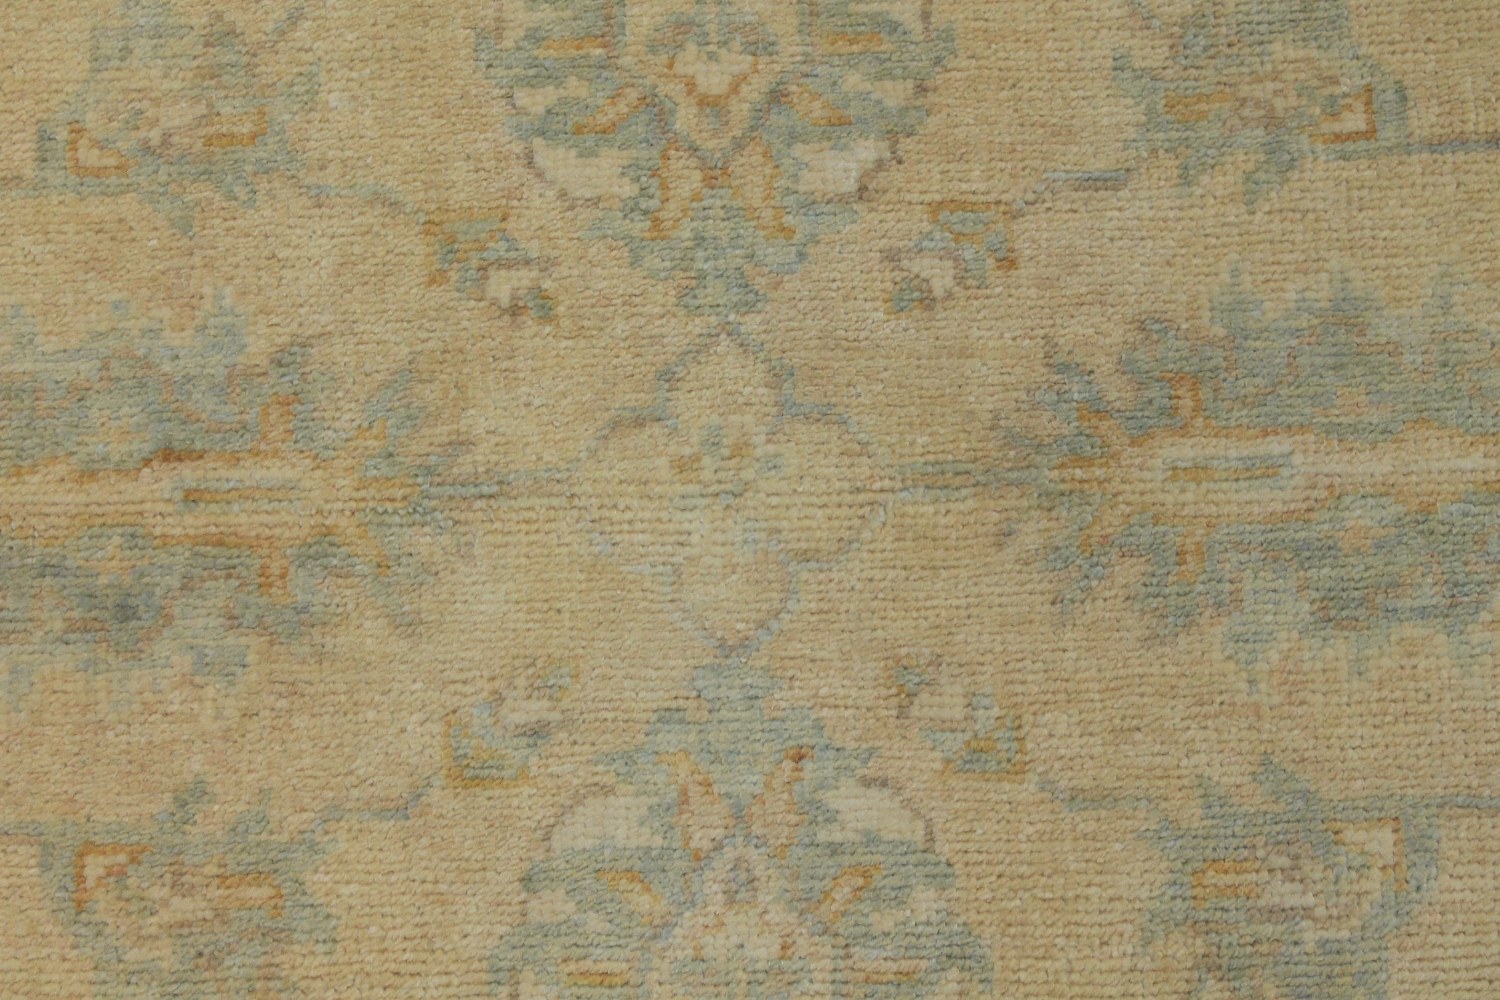 4x6 Oushak Hand Knotted Wool Area Rug - MR14866